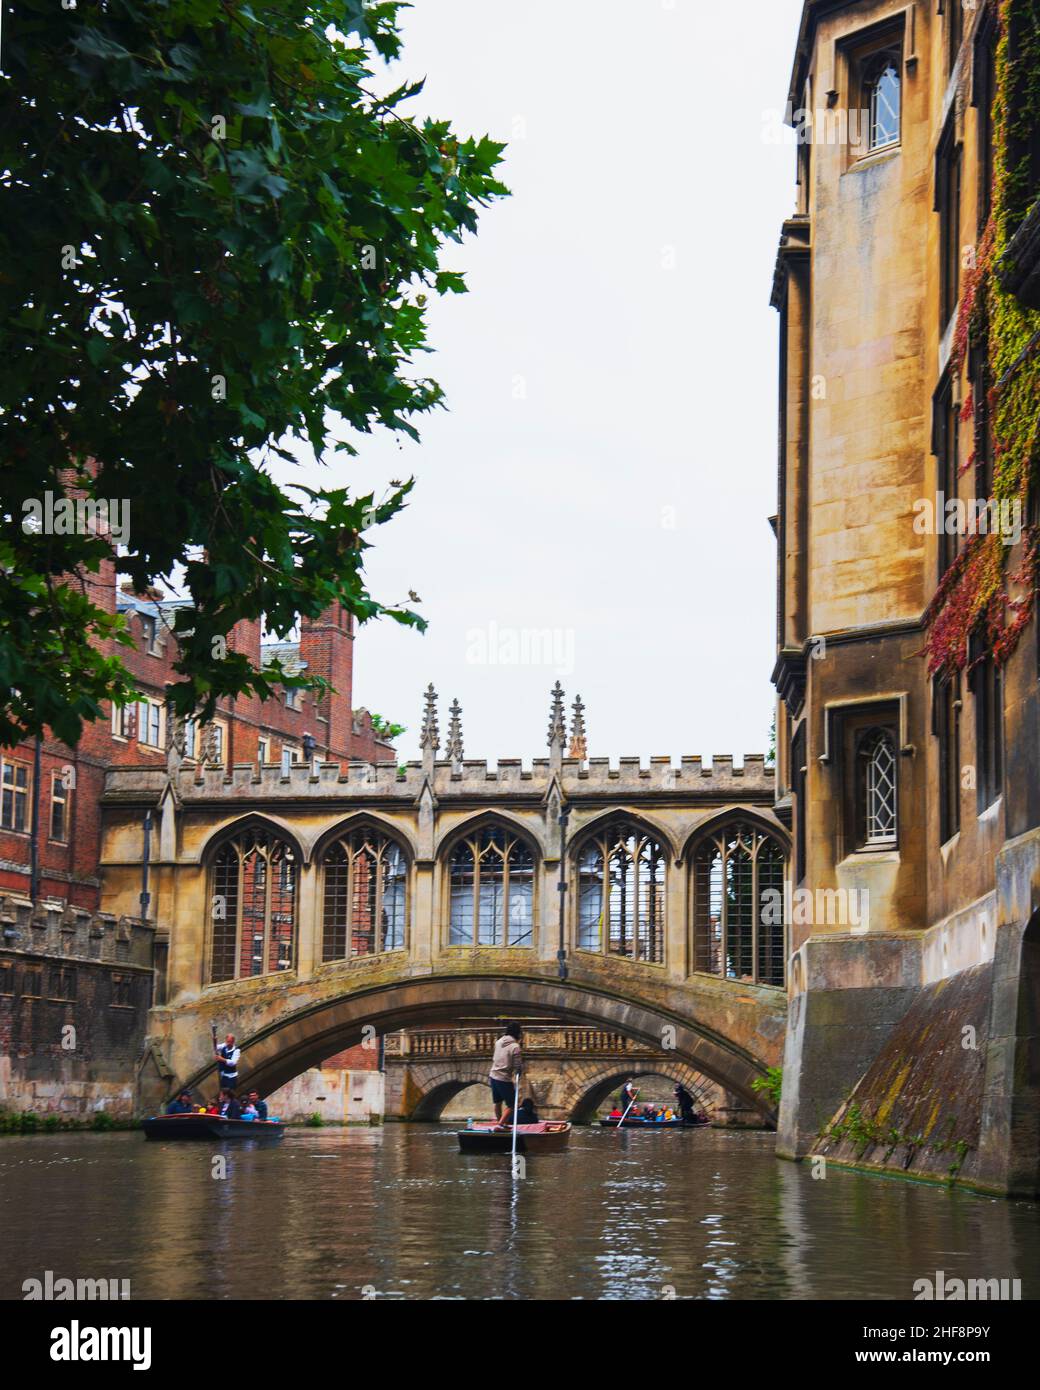 The Bridge of Sighs, St Johns College, Cambridge with a punt going beneath it. Taken from the River Cam. Stock Photo